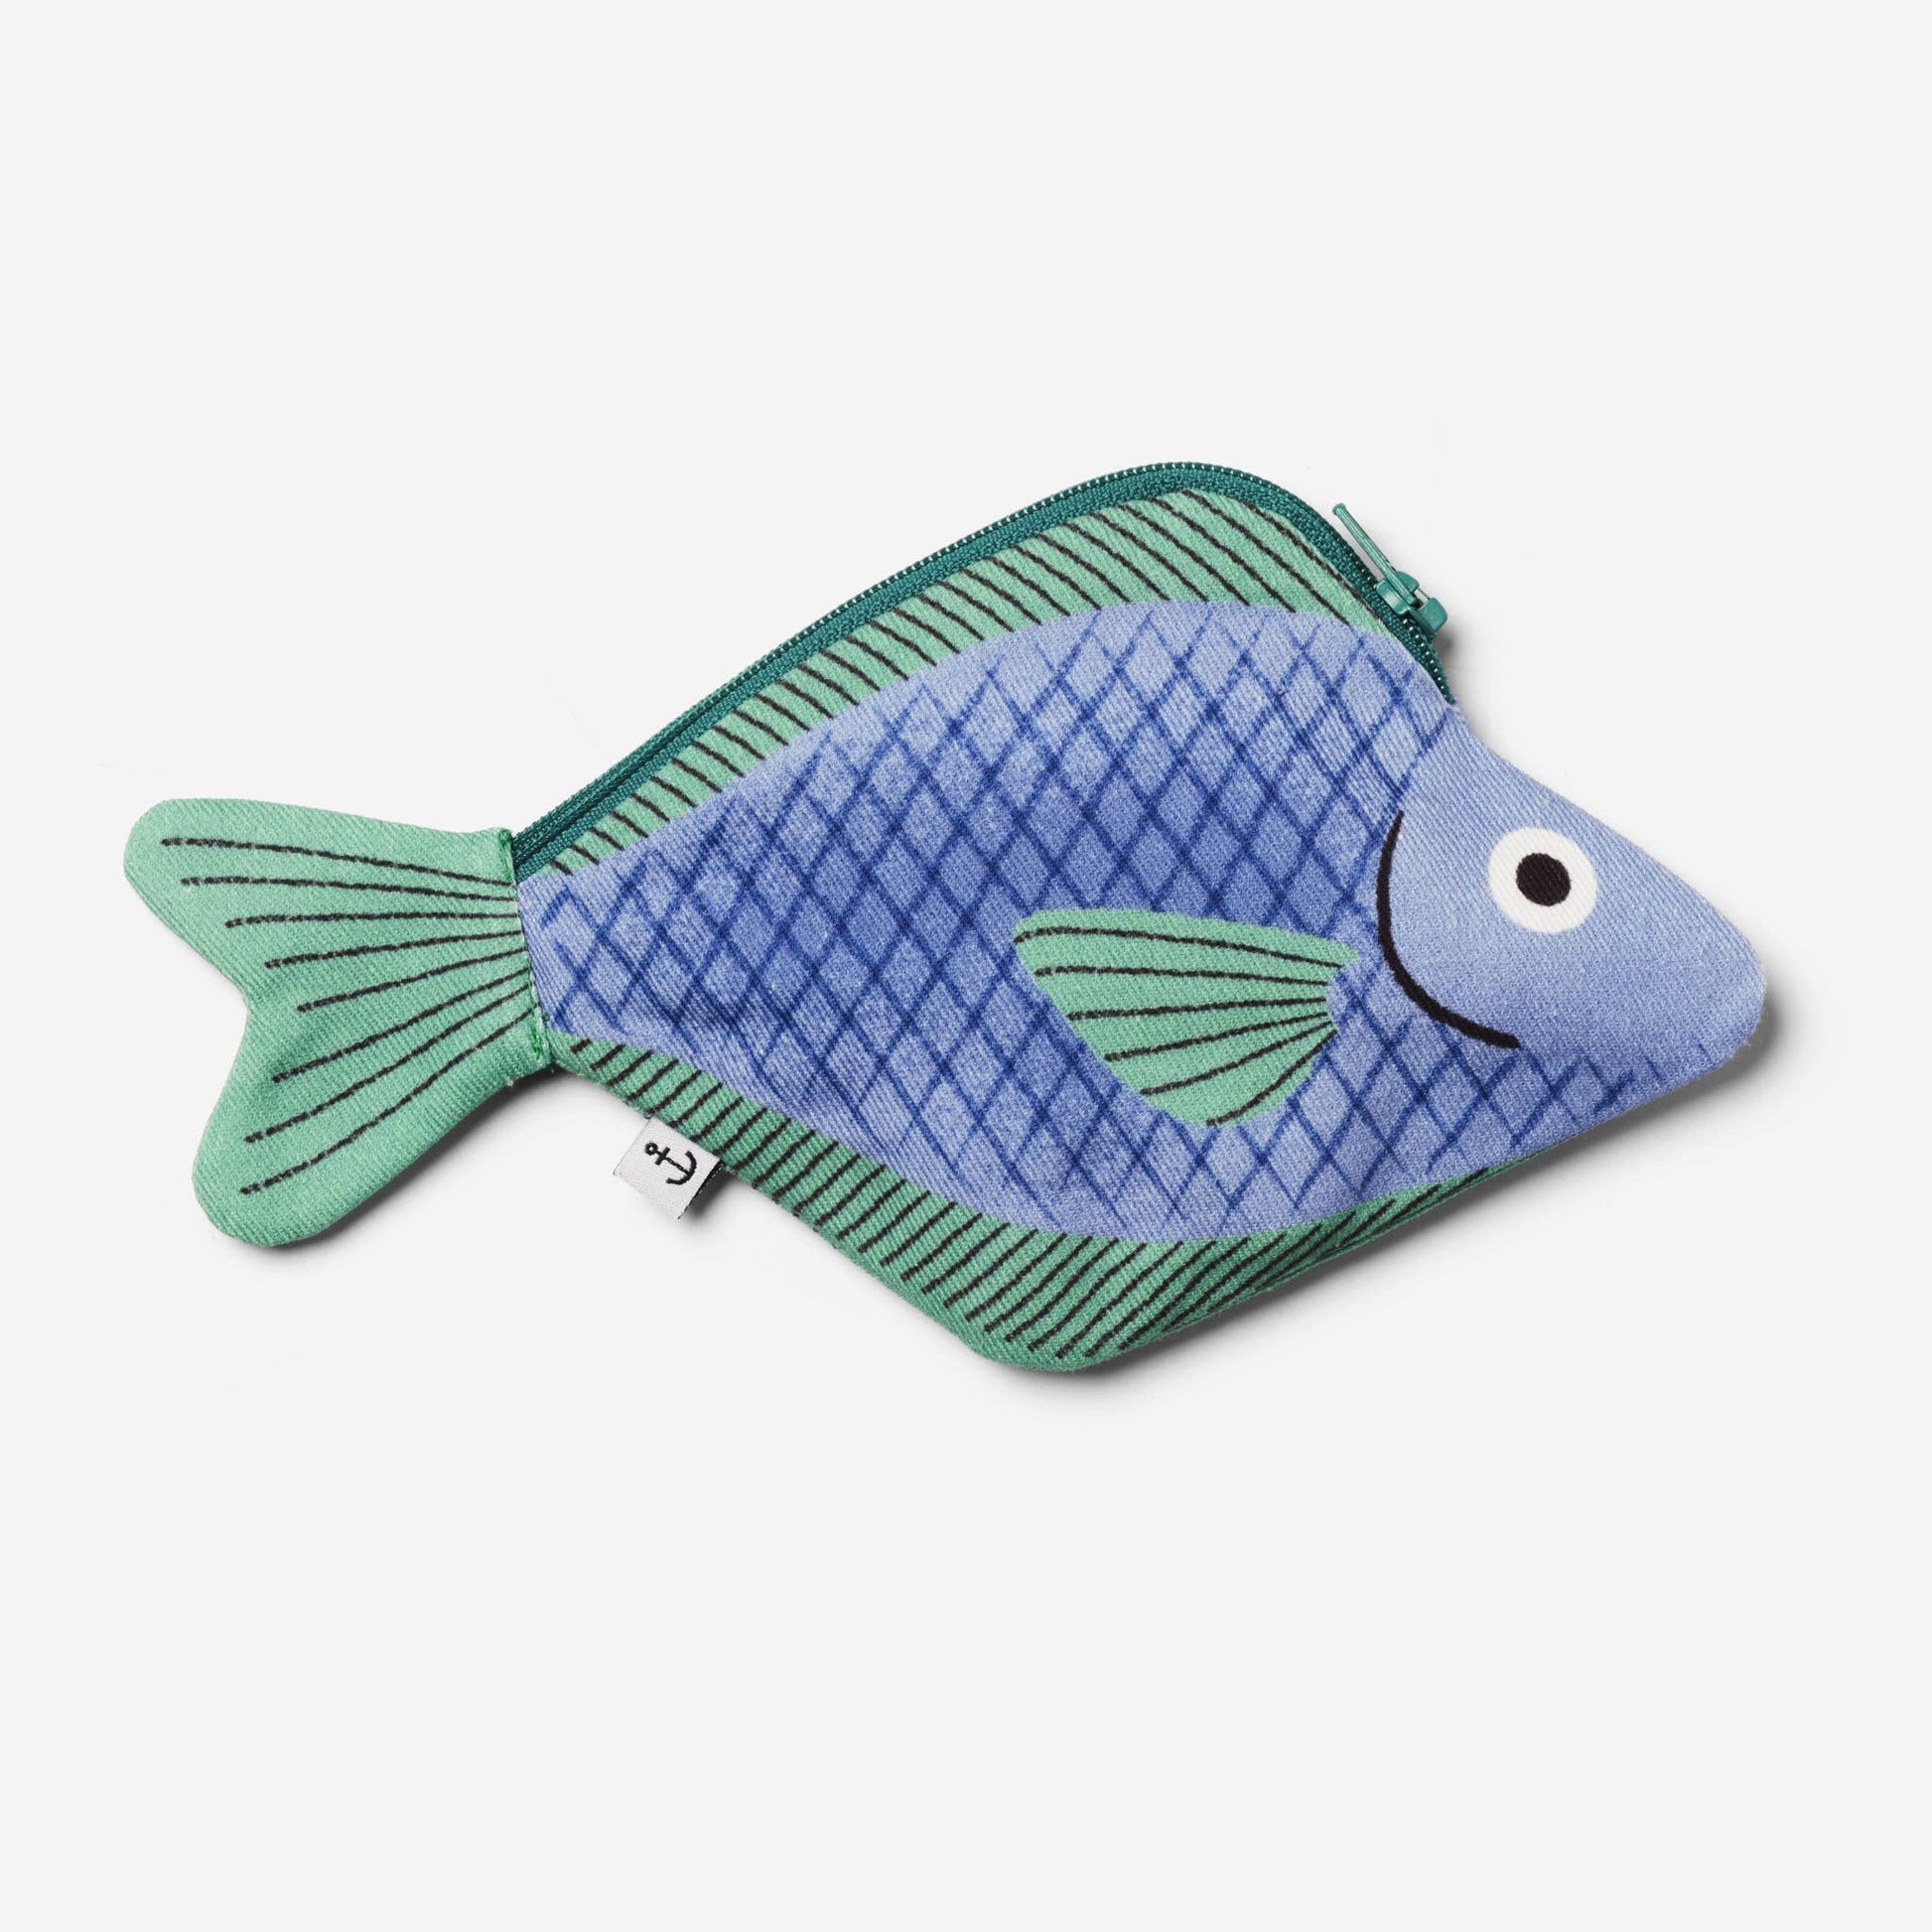 Seabream Fish Pouch -- fish is lilac with dark blue criss-crossed lines for the scales. Top, bottom and tail fins are all light blue 